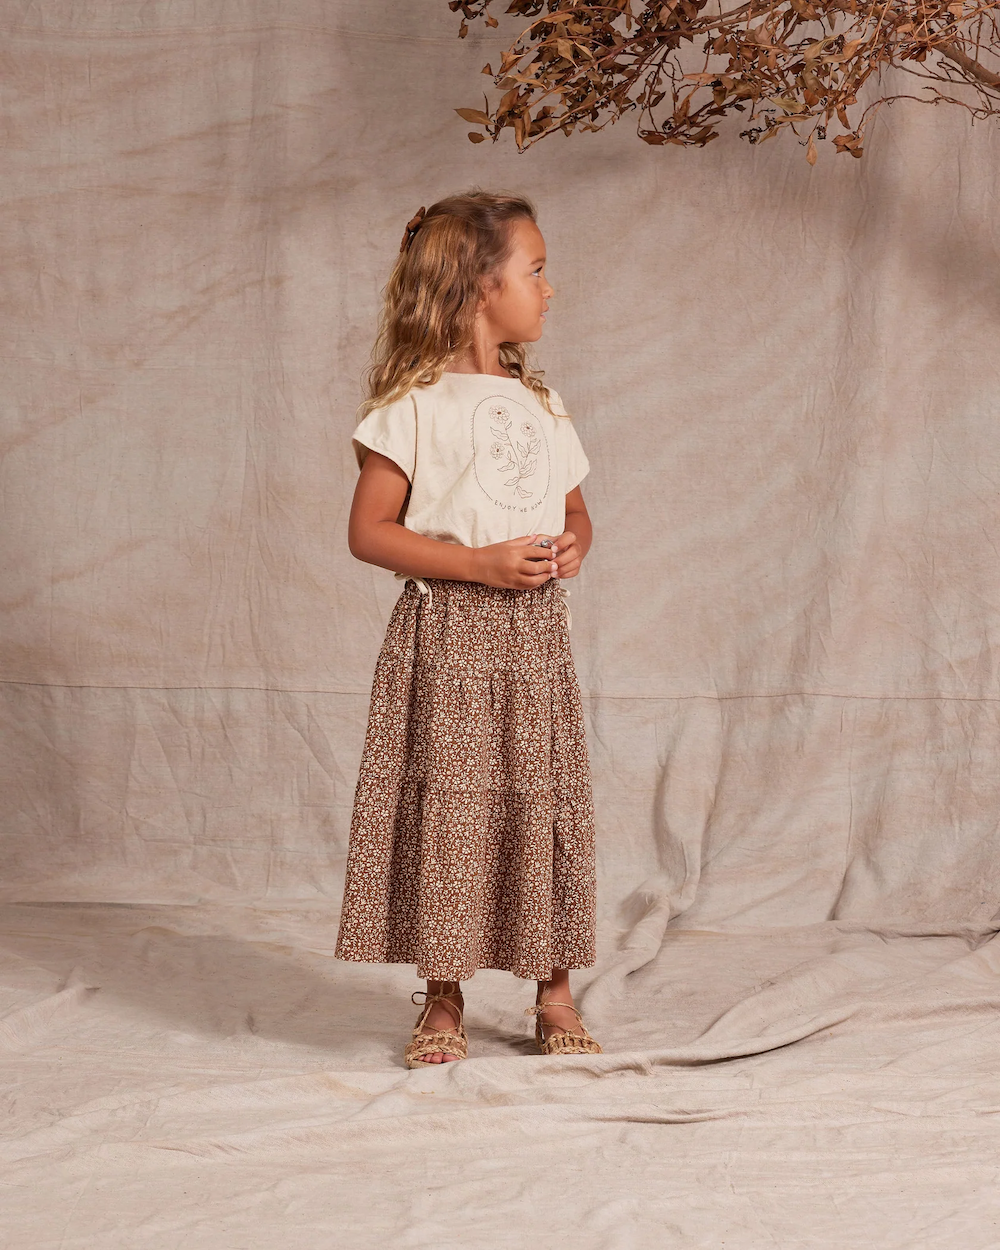 Rylee and Cru Tiered Midi Skirt Chocolate Floral | Tiny People